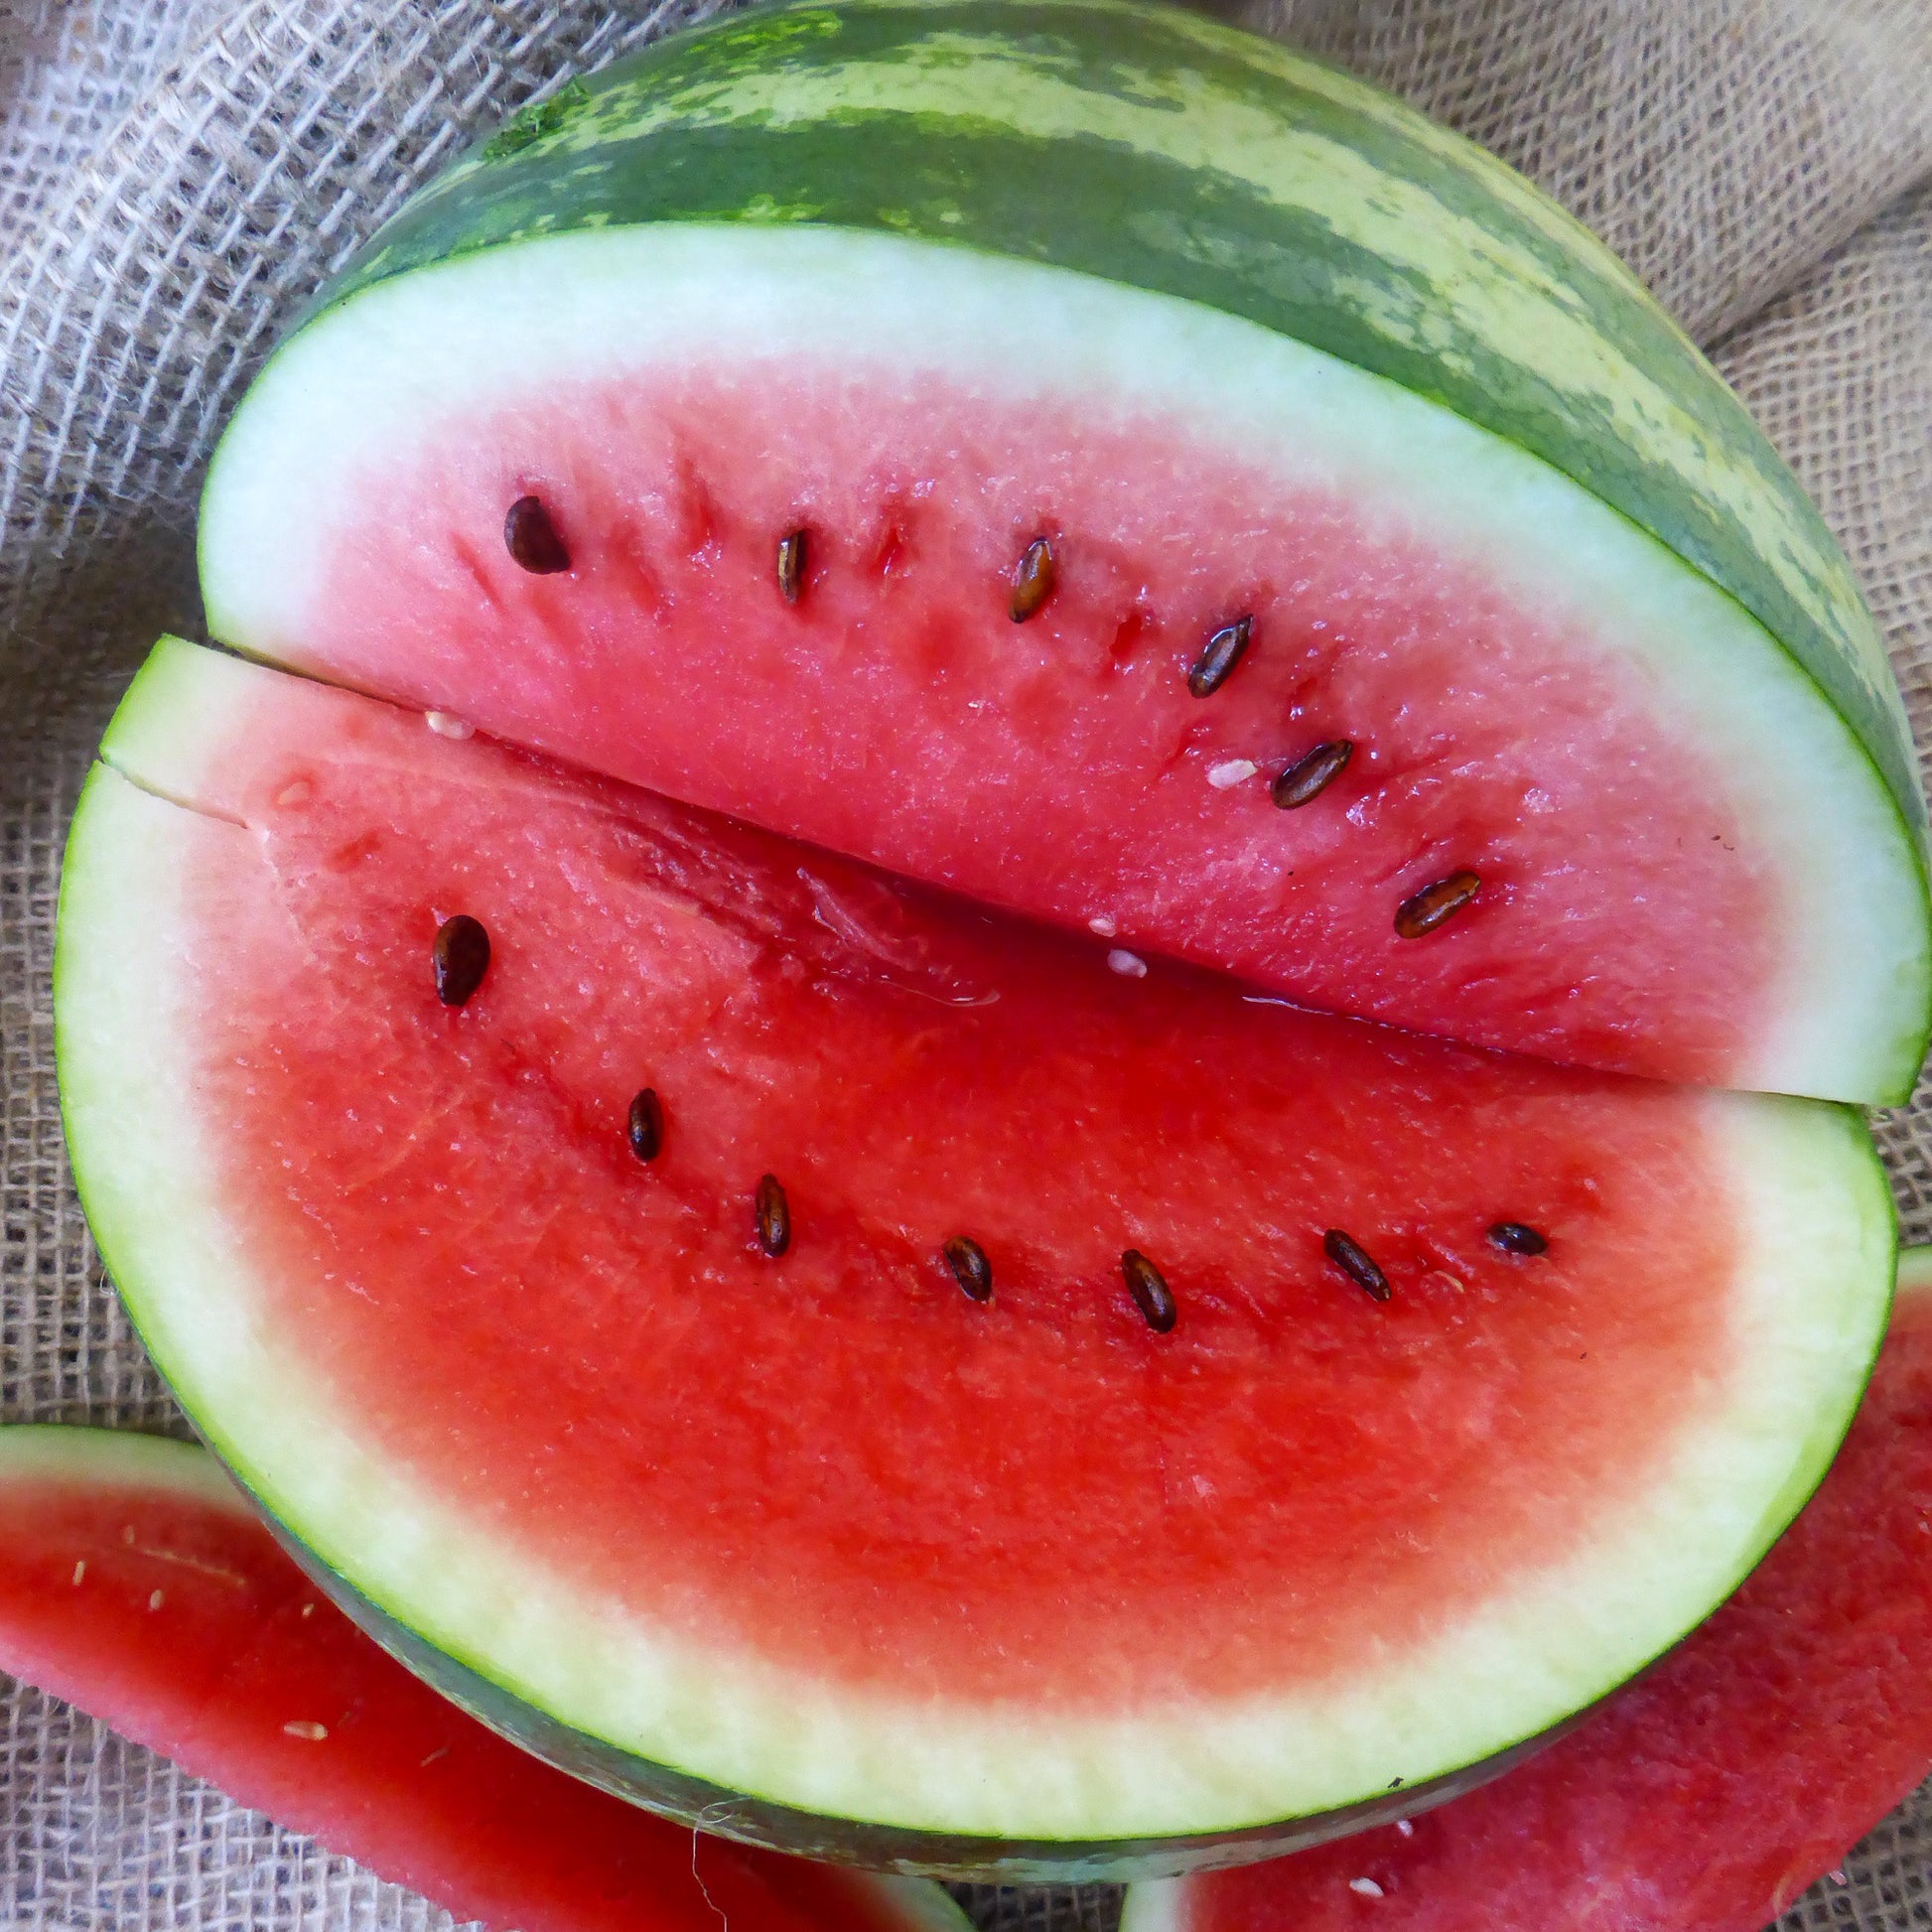 Black Diamond Heirloom Watermelon seeds fully matured and a delicious watermelon has been harvested from the plant they grew into! Closeup of watermelon with a quarter open to see inside.